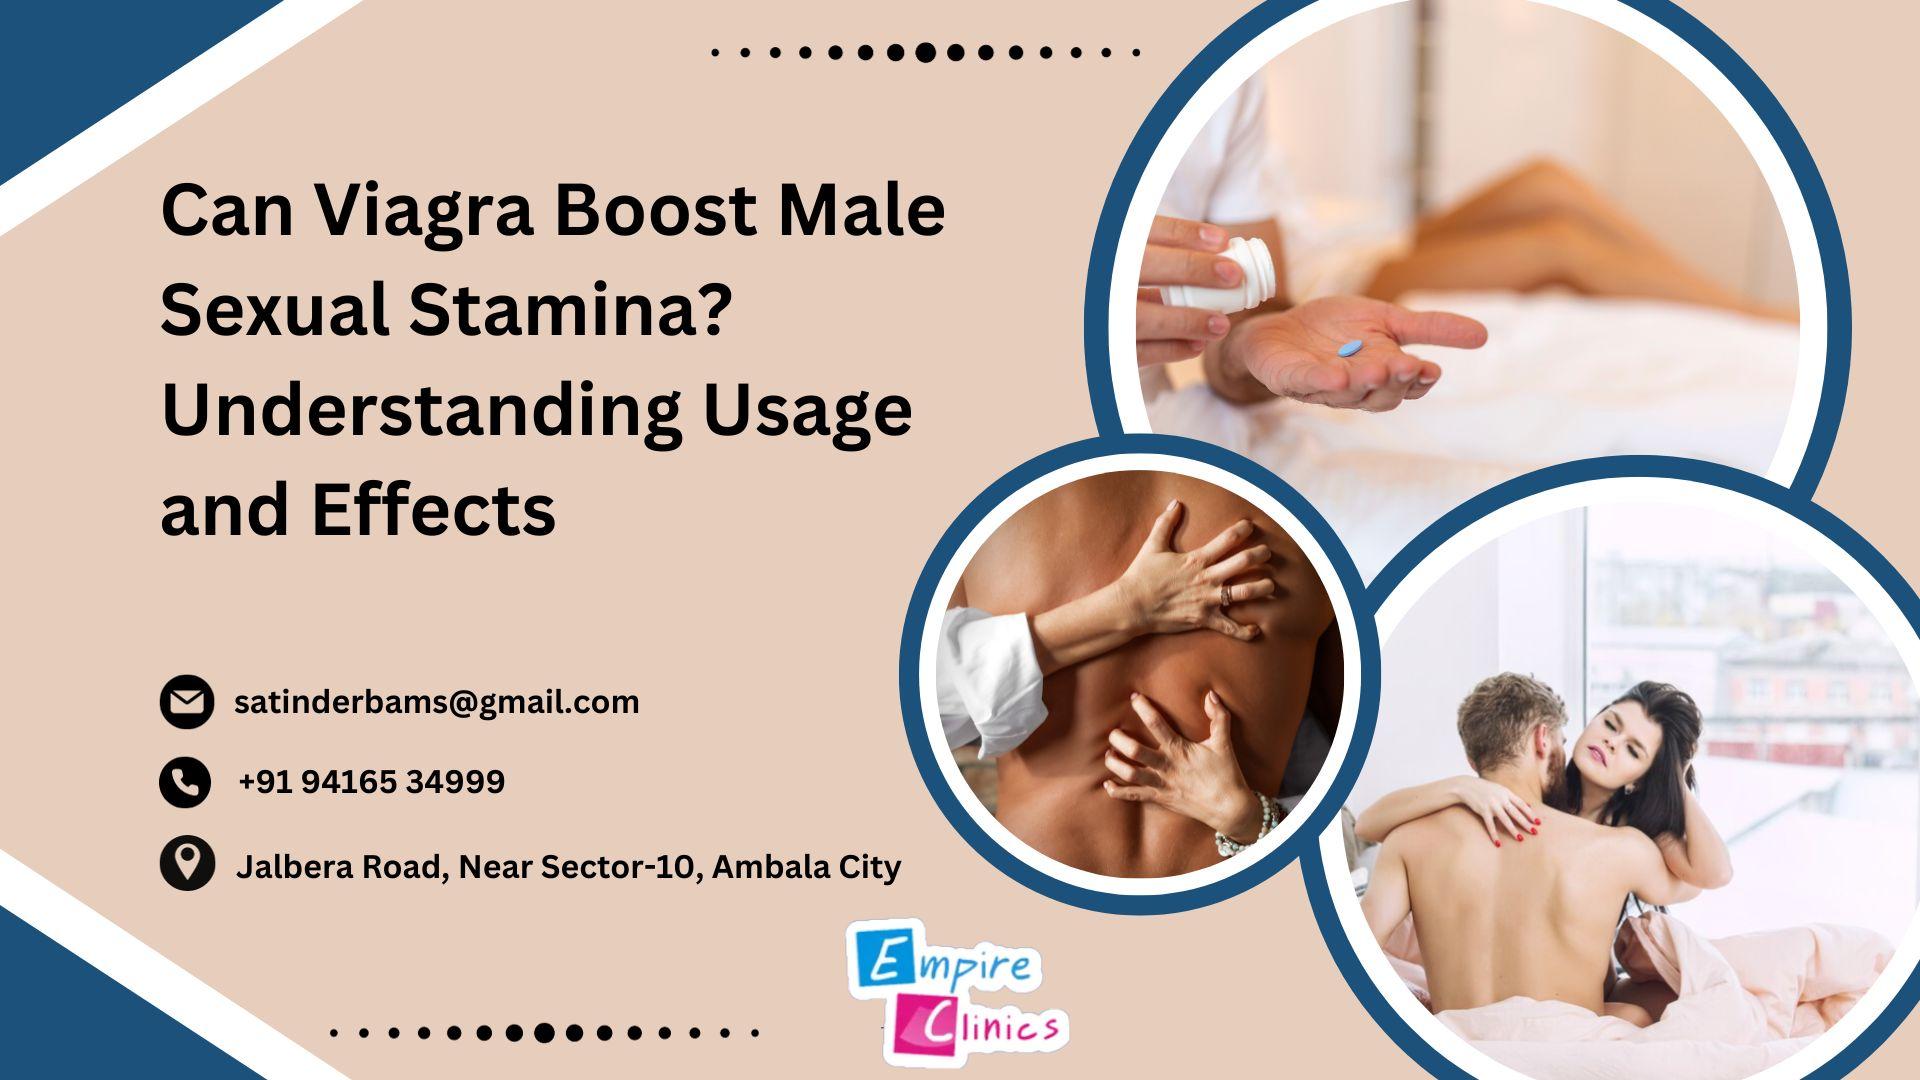 Can Viagra Boost Male Sexual Stamina? Understanding Usage and Effects